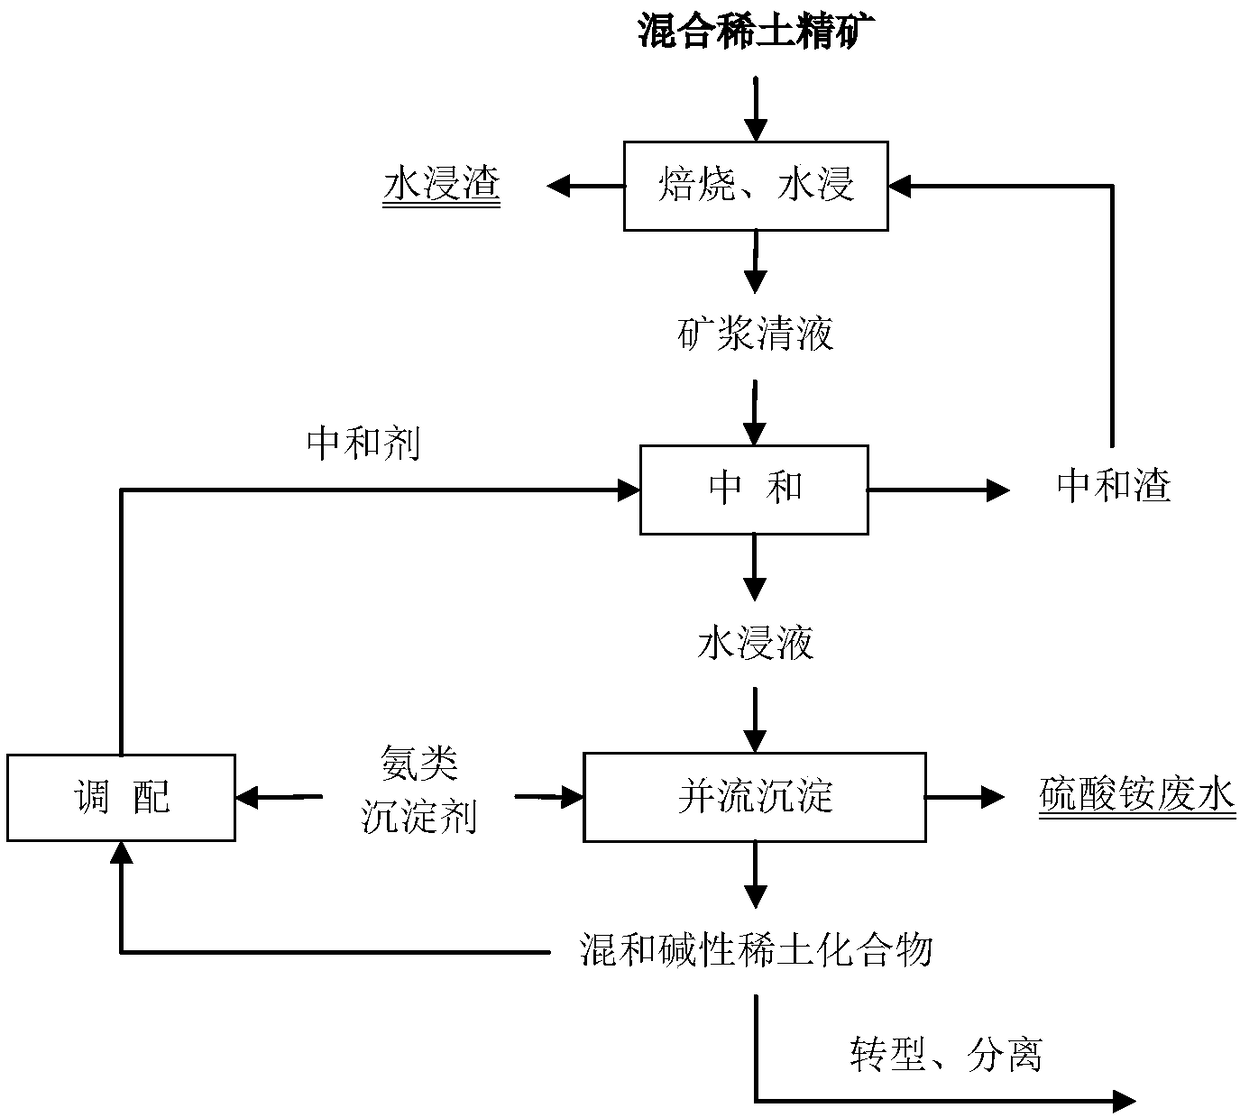 Method for preparing high-purity mixed rare earth chloride by sulfuric acid rare earth water leaching liquid neutralization, impurity removal and recycling